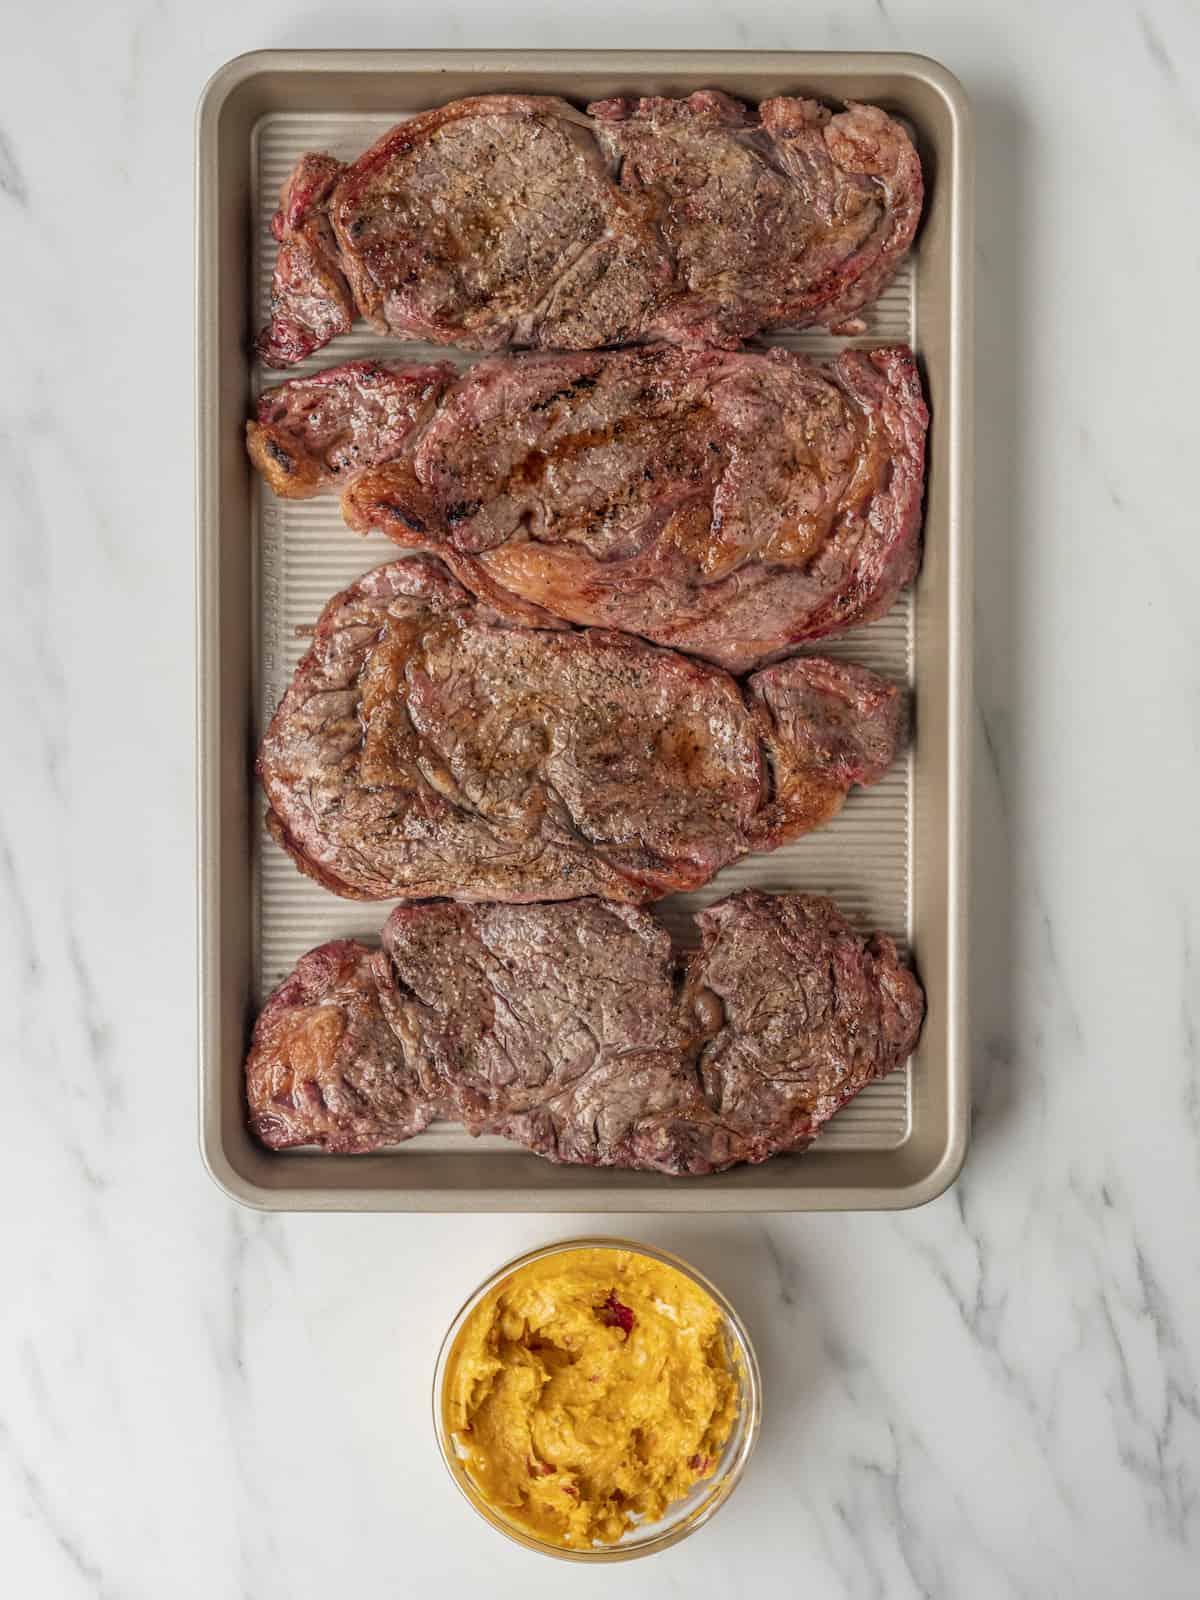 A baking sheet with grilled ribeyes seasoned and a small bowl of calabrian chile compound butter on the side.